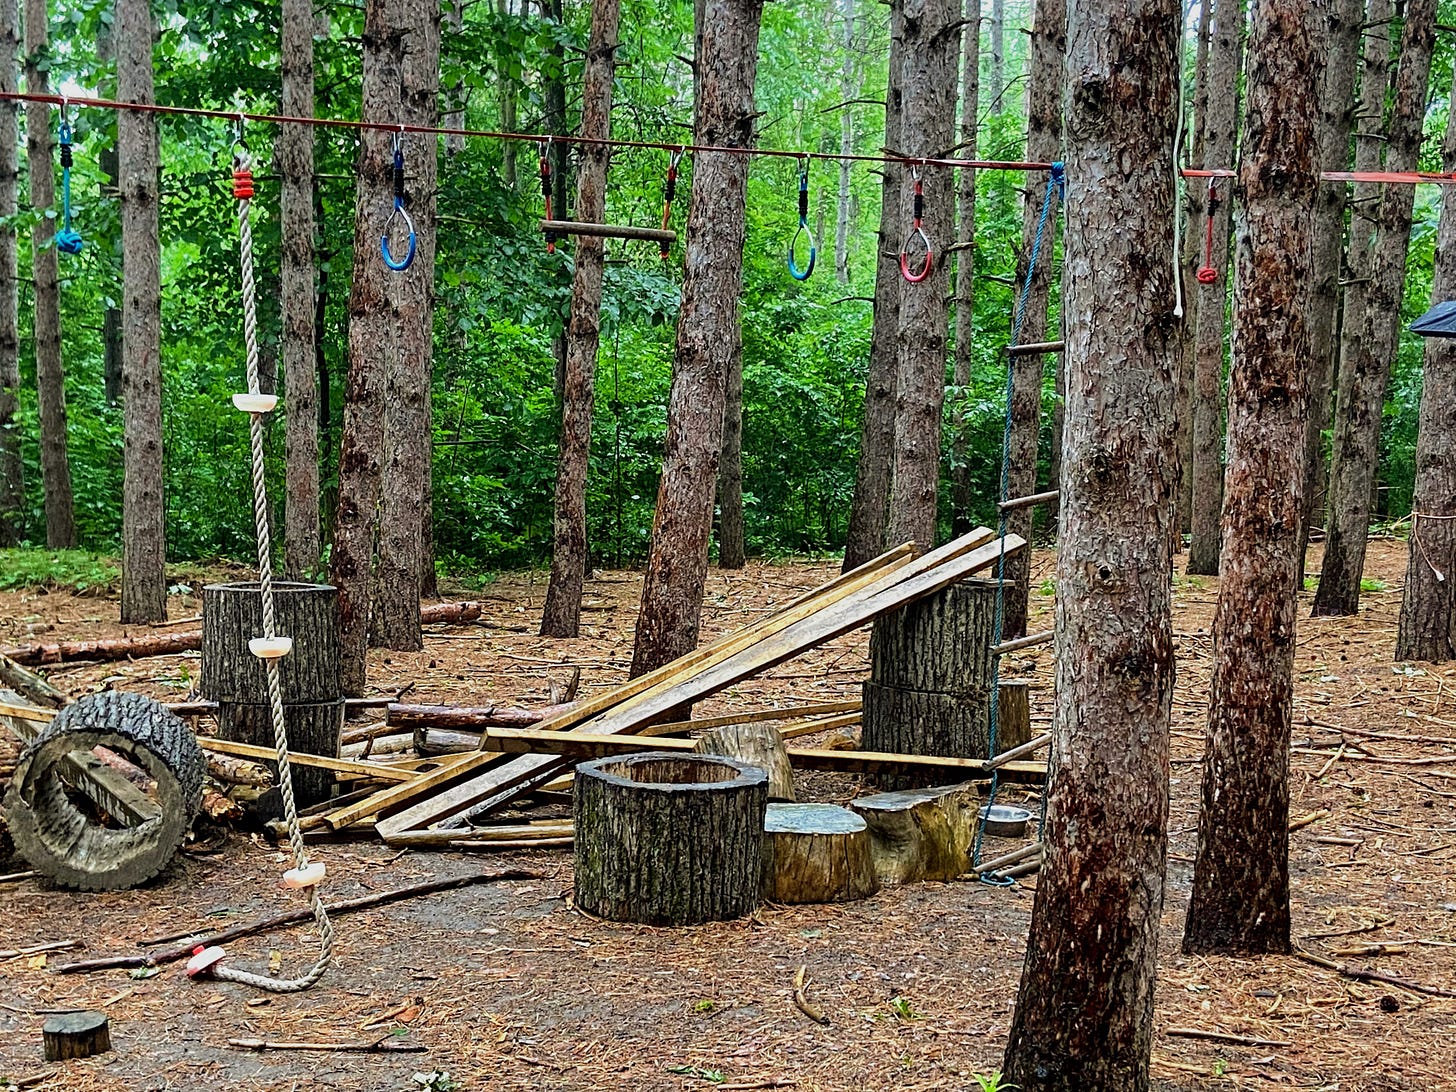 Trees with climbing and swinging equipment strung between